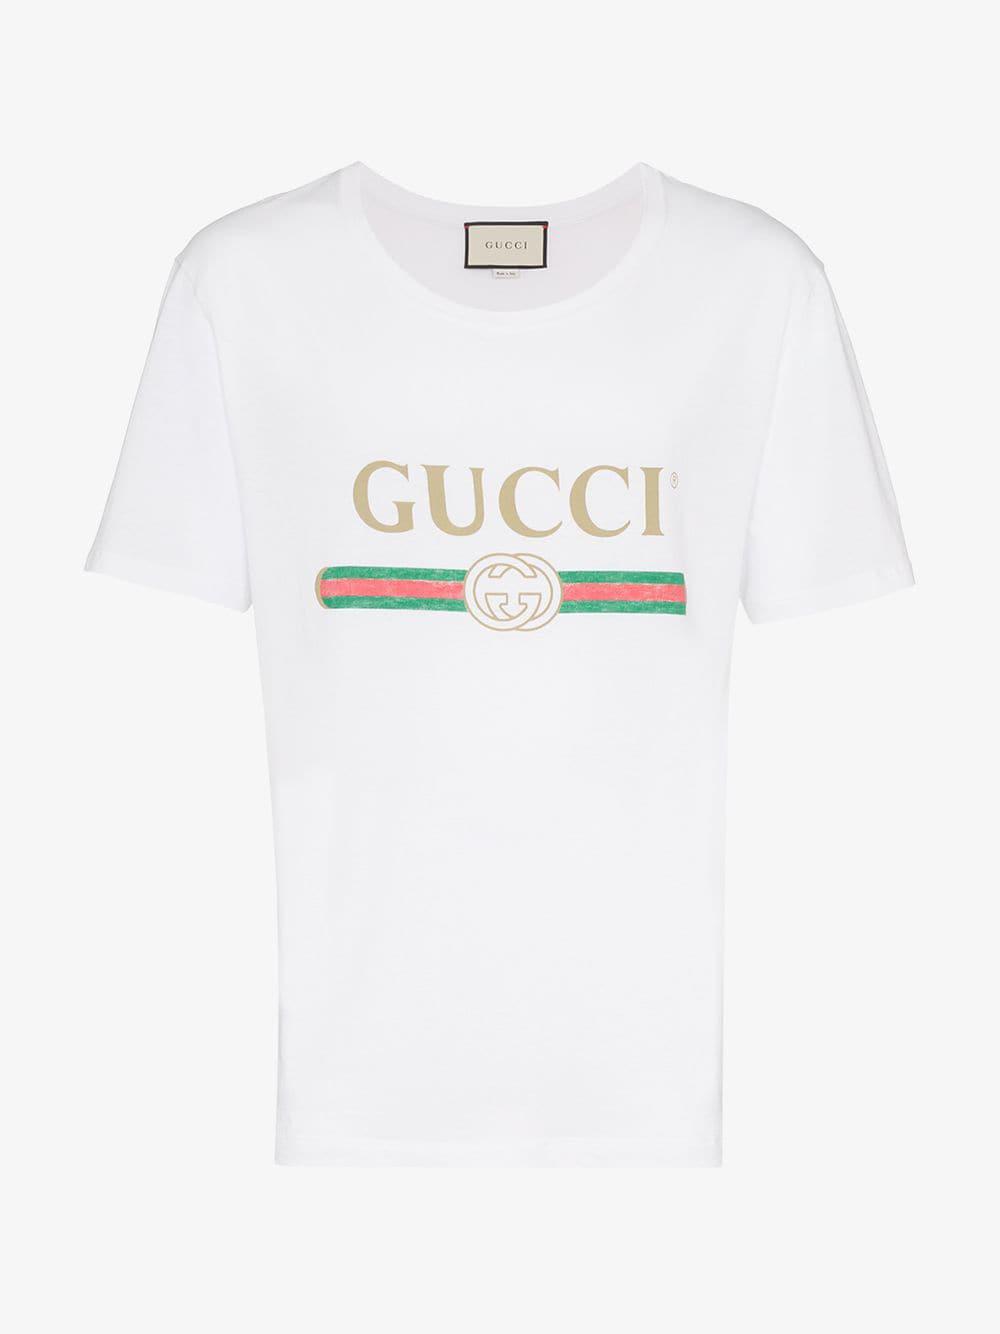 Gucci Washed T-shirt With Print in White for Men - Lyst